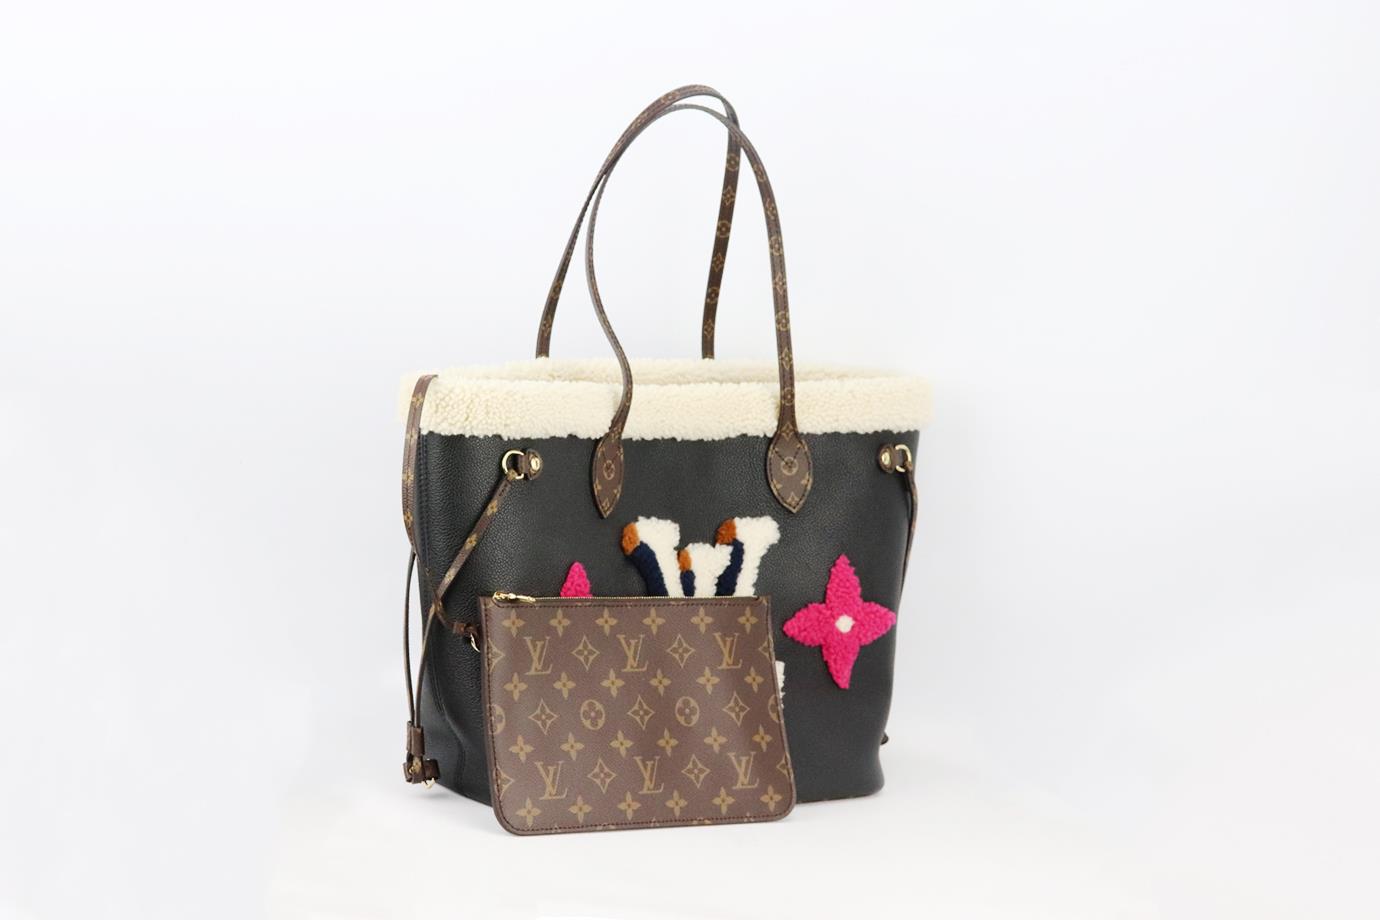 LOUIS VUITTON 2020 NEVERFULL MM MONOGRAM SHEARLING AND LEATHER BAG